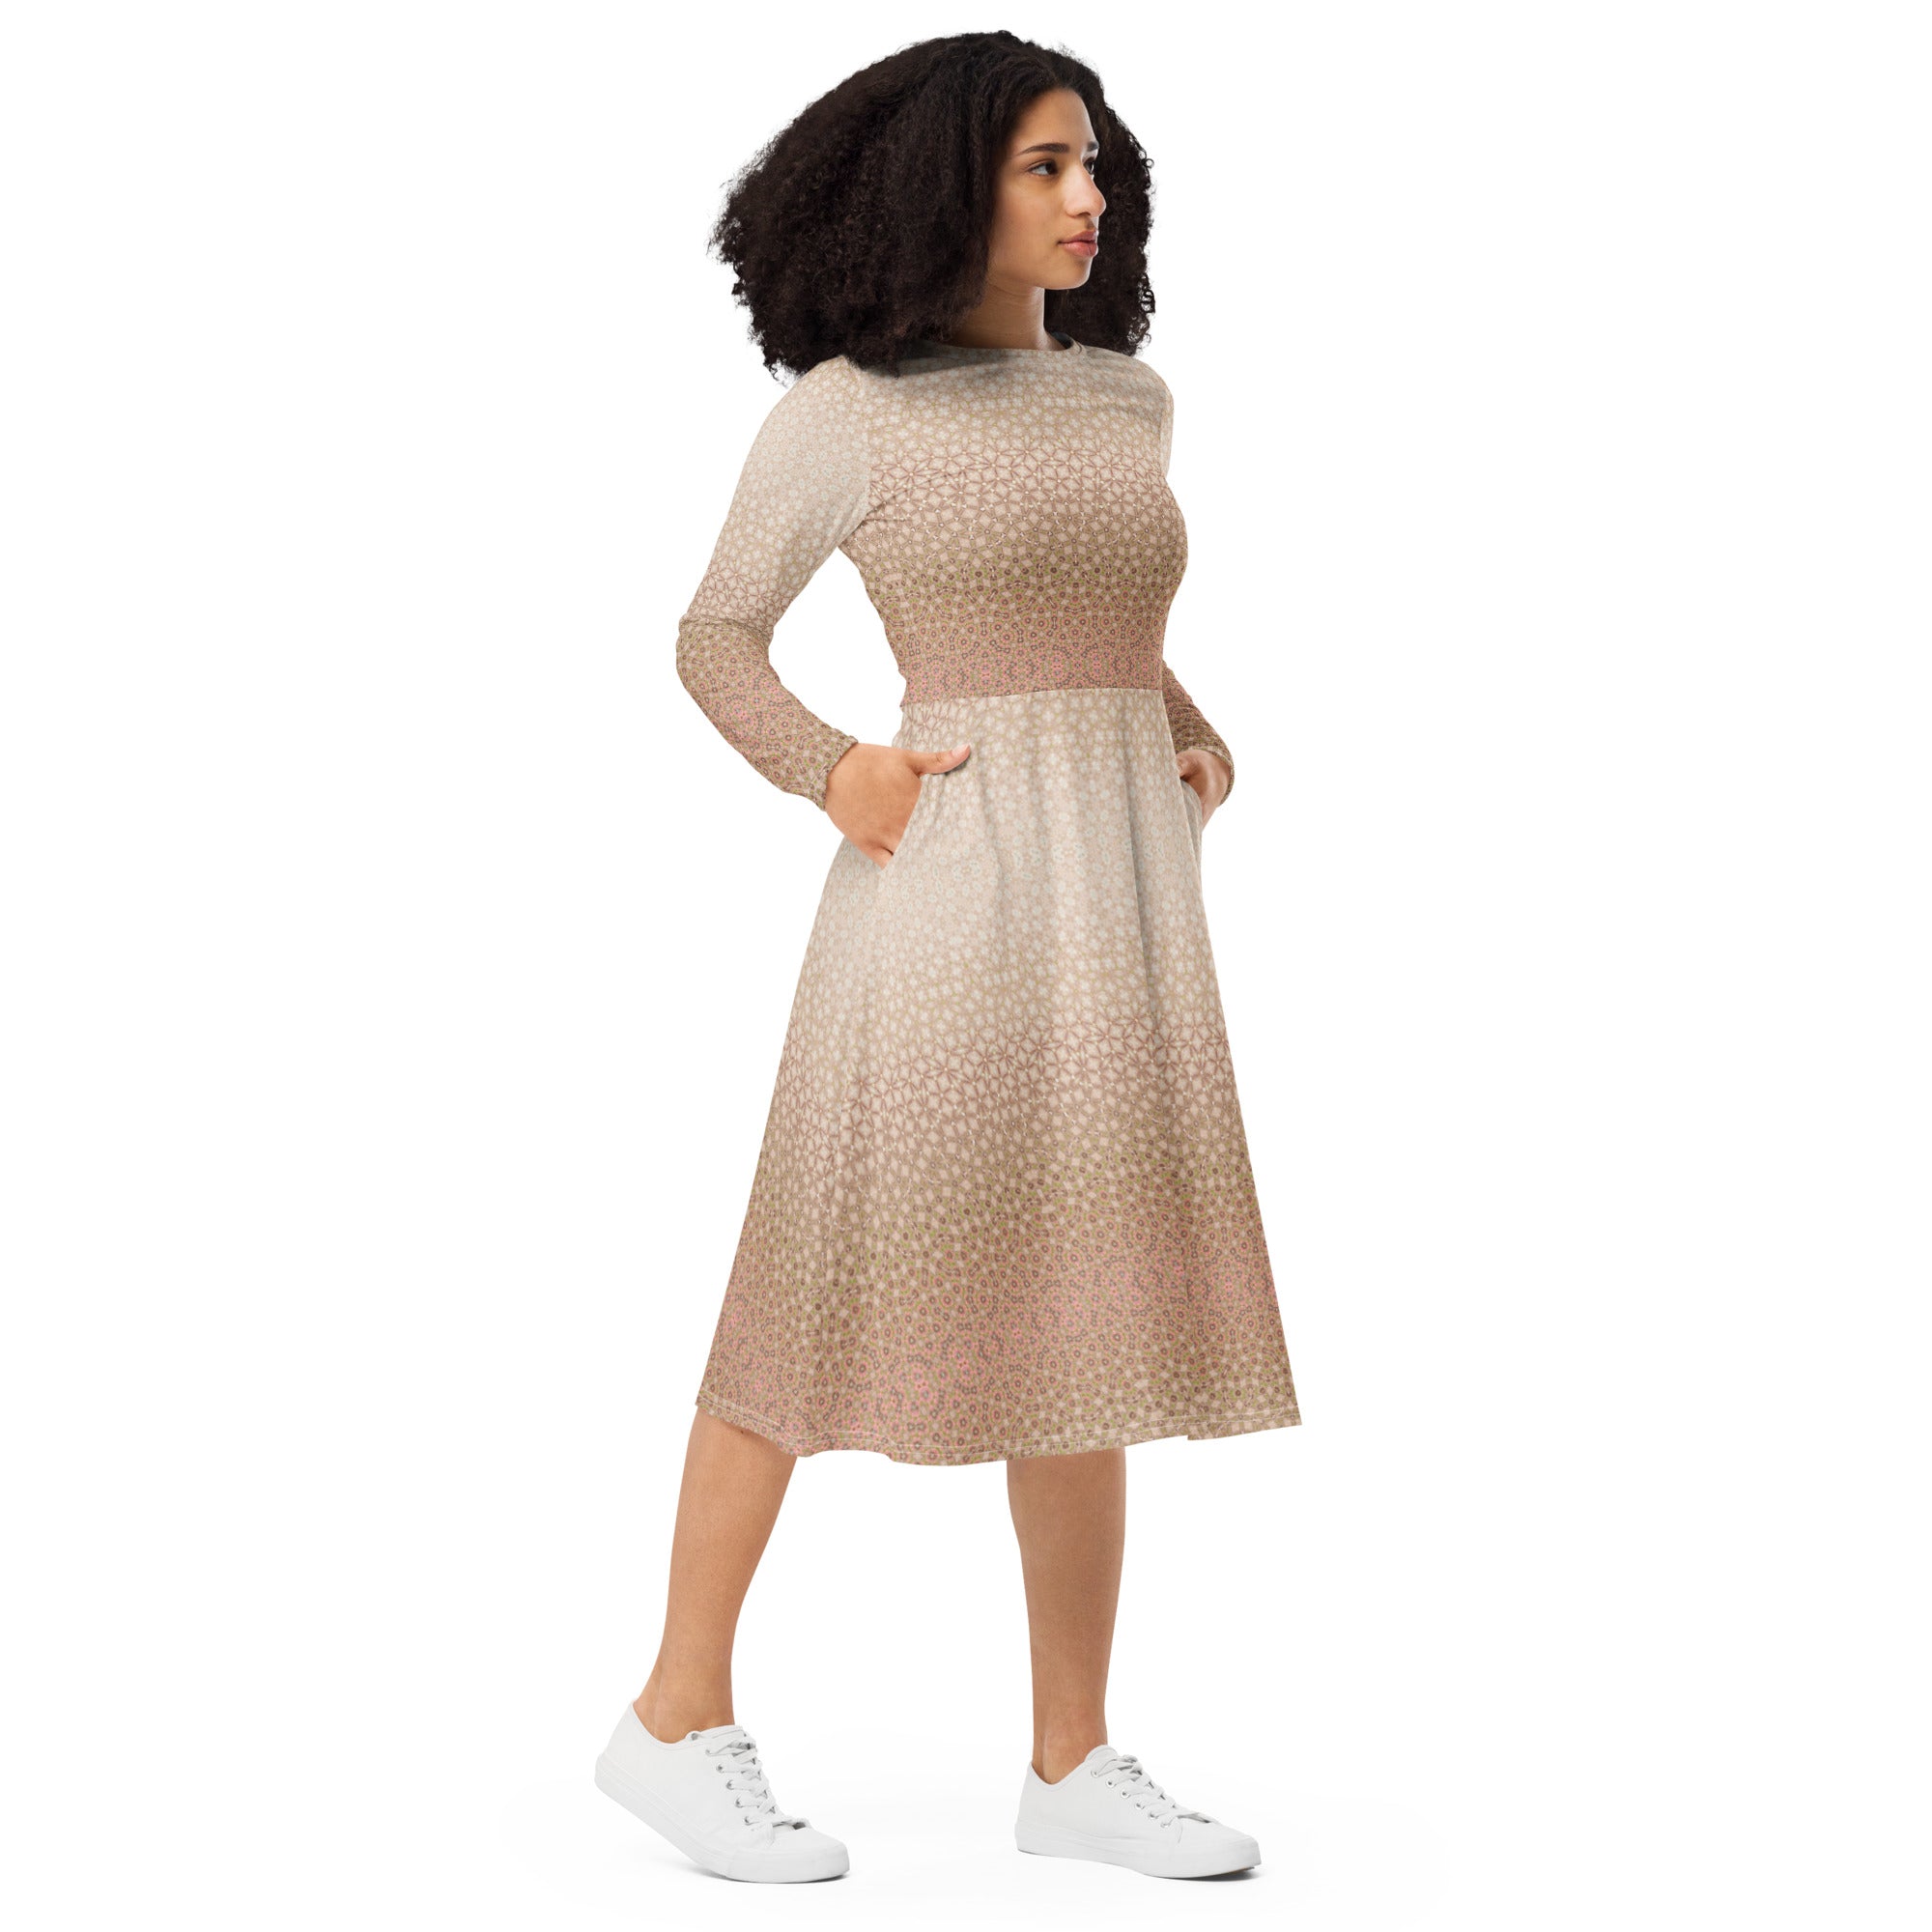 Delicate Pale Pink & Beige Rosy Patterned Stylish long sleeve midi dress, by Sensus Studio Design